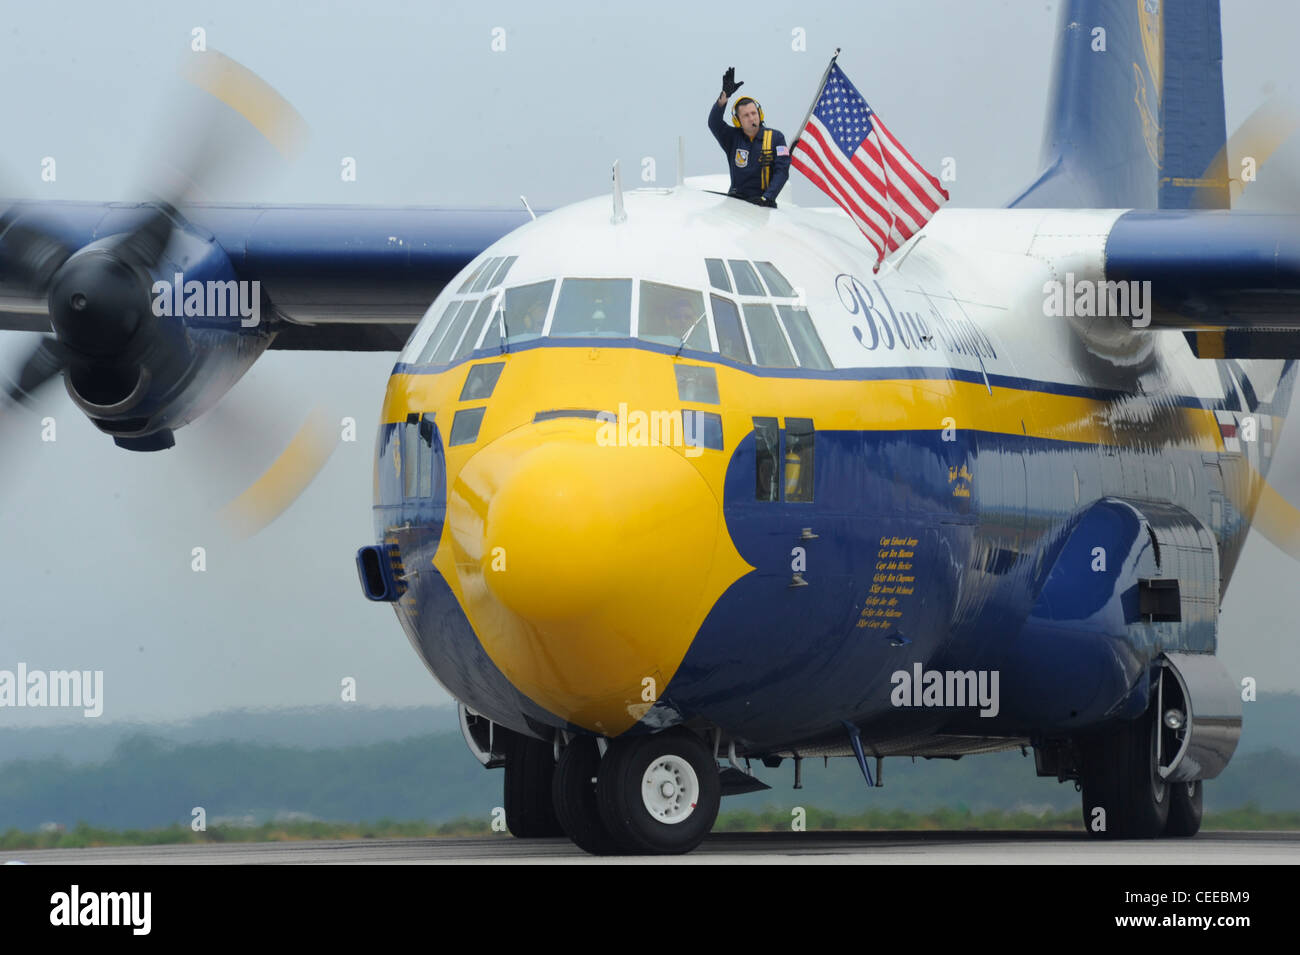 Marine Gunnery Sgt. Joe Alley, a C-130 navigator assigned to the U.S. Navy flight demonstration squadron, the Blue Angels, waves to the crowd after Fat Albert, the Blue AngelsÕ C-130 Hercules, lands while performing at the Rhode Island National Guard Open House Air Show. The Blue Angels performed in Rhode Island during the 2011 show season and in celebration of the Centennial of Naval Aviation. Stock Photo